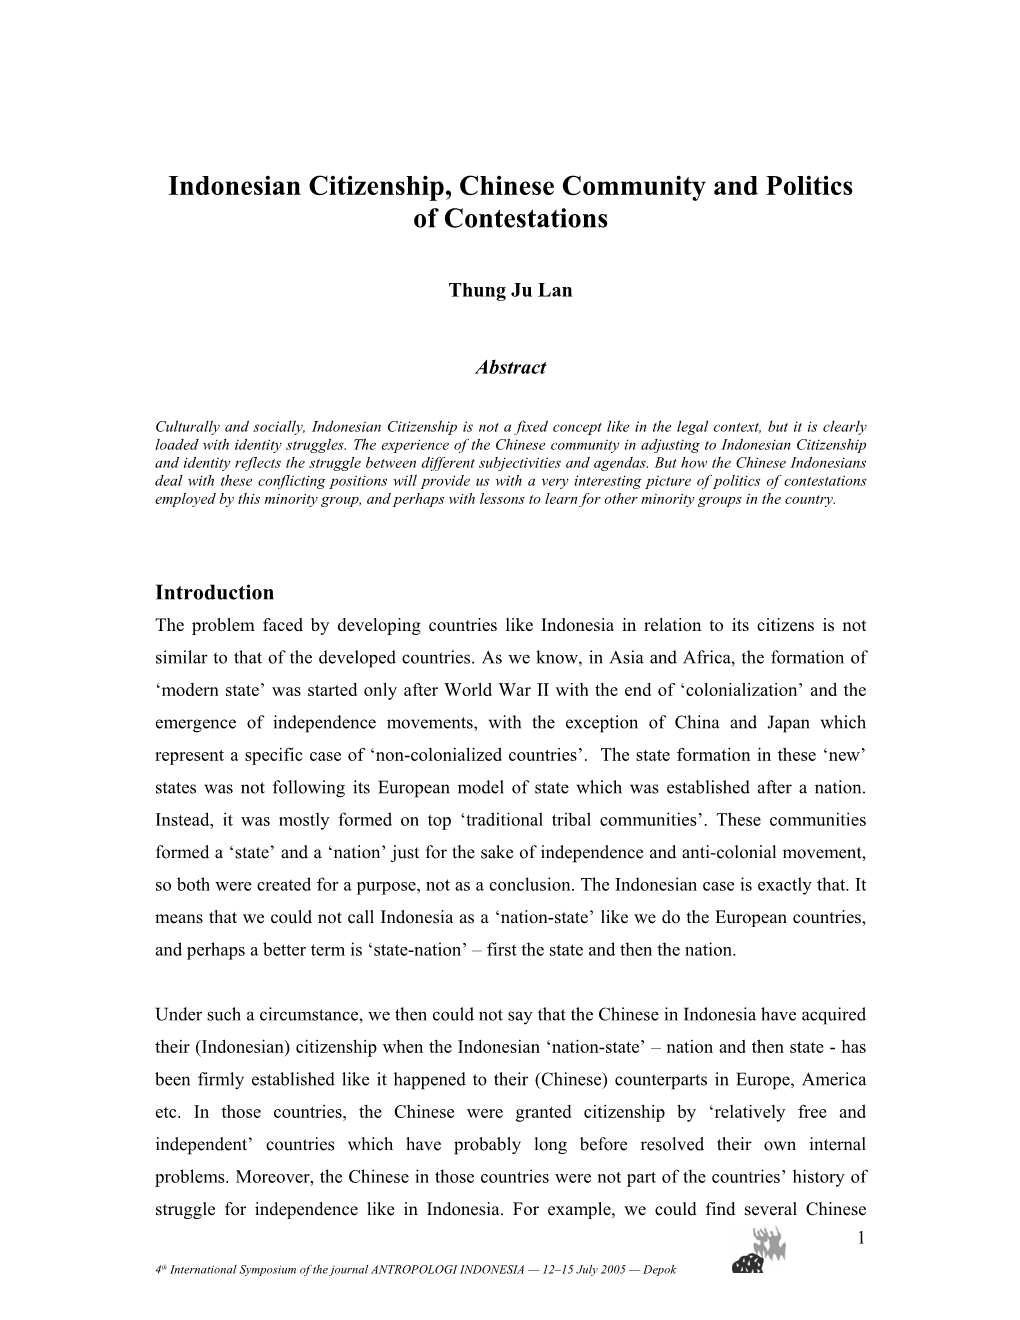 Indonesian Citizenship, Chinese Community and Politics of Contestations